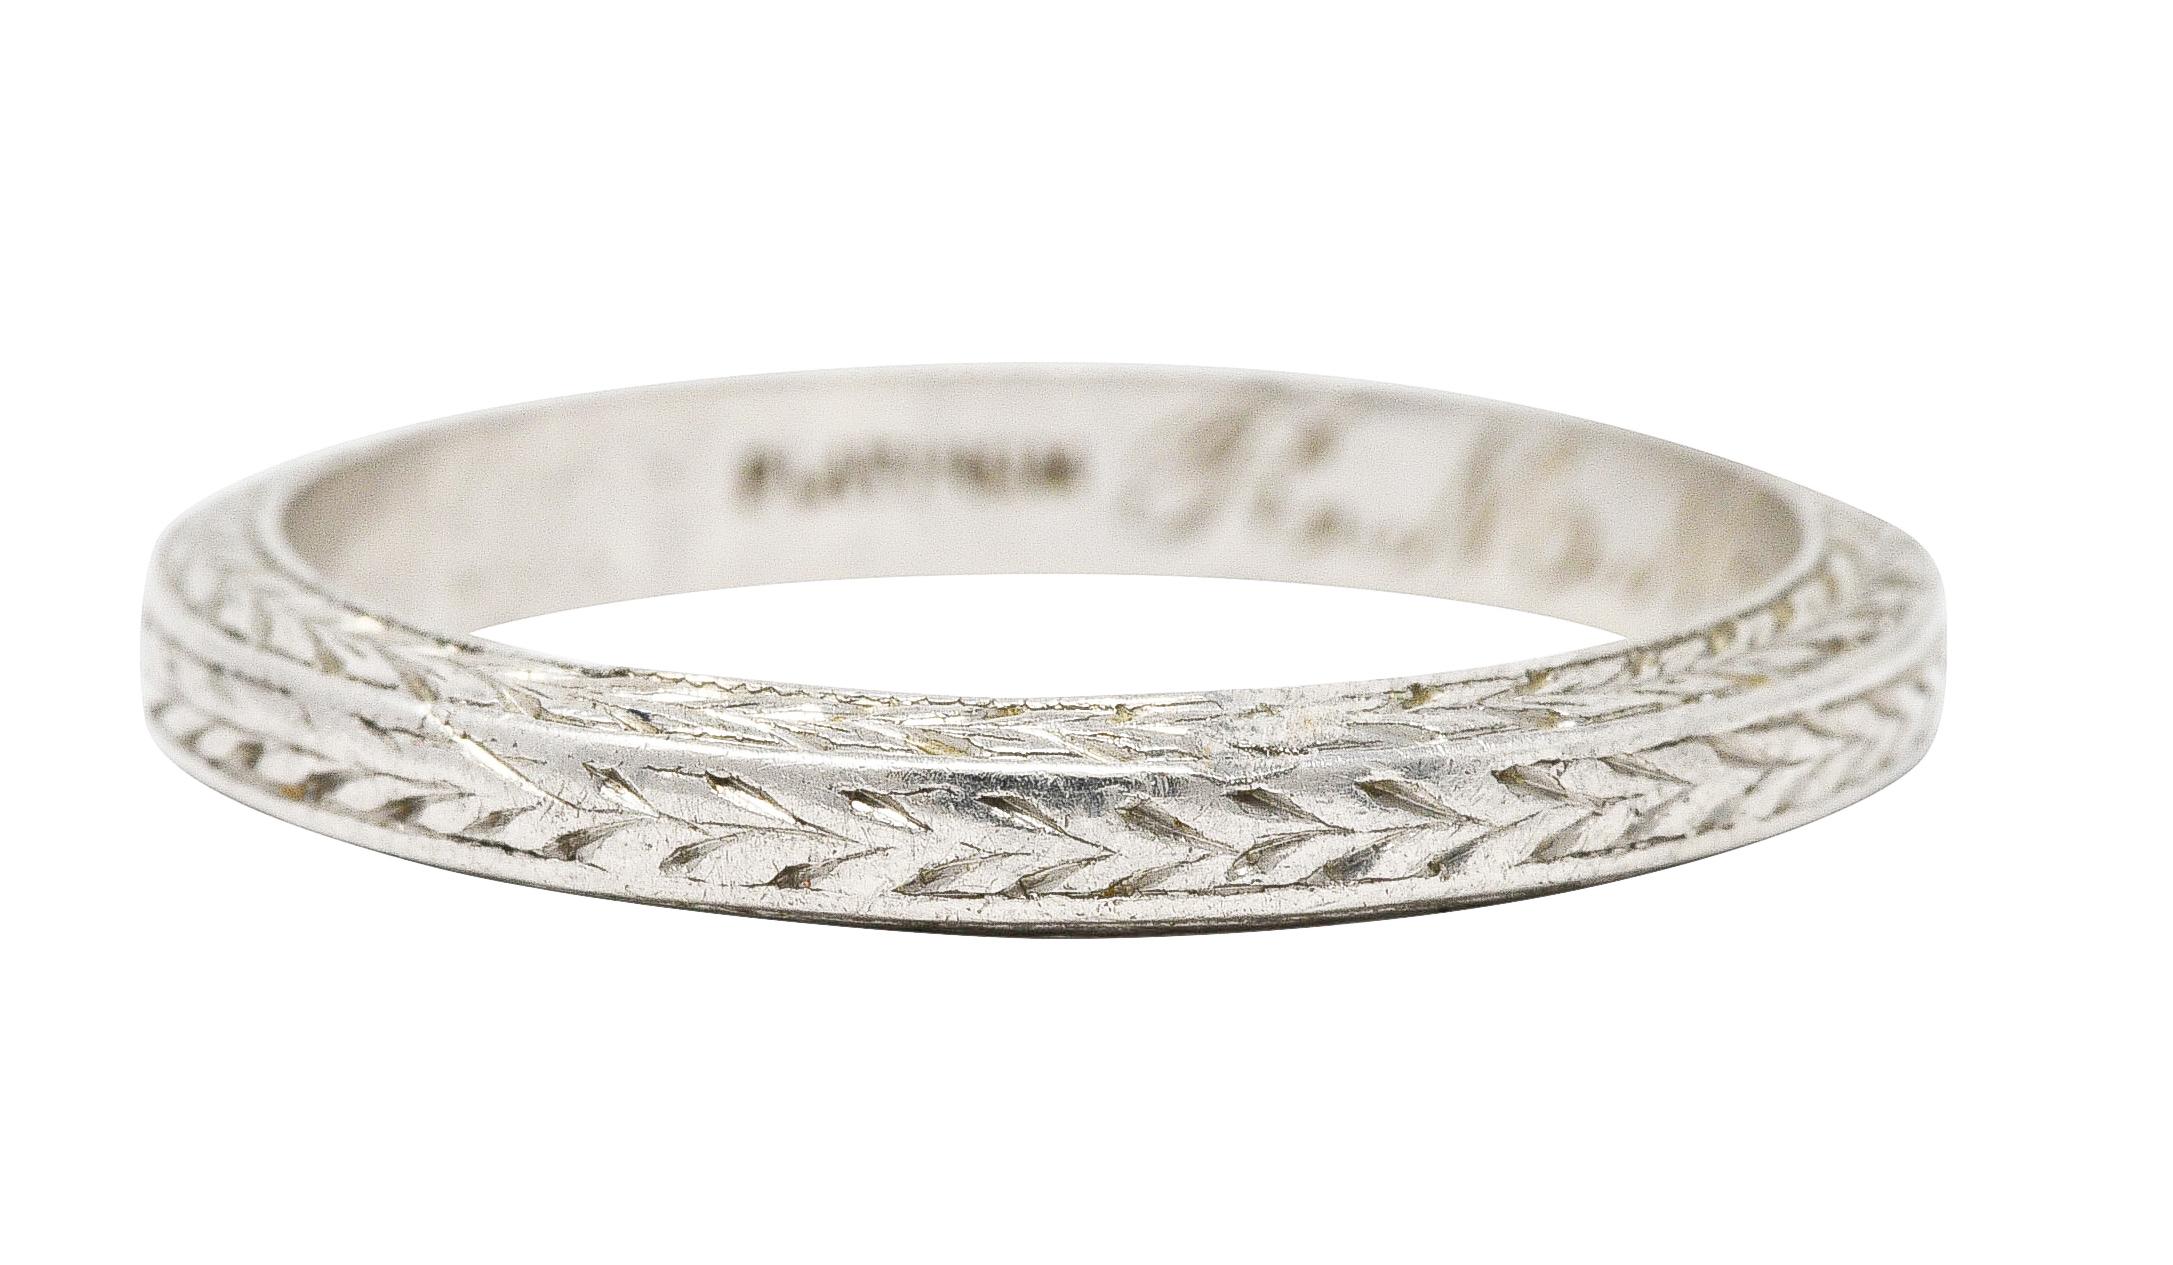 Band ring features engraved wheat motif throughout. Inscribed 'R.M.M. and D.M.W. Feb. 21. 24'. Stamped for platinum. Circa: 1924. Ring size: 5 1/4 and not sizable. Measures: North to South 2.5 mm and sits 1.5 mm high. Total weight: 3.0 grams.